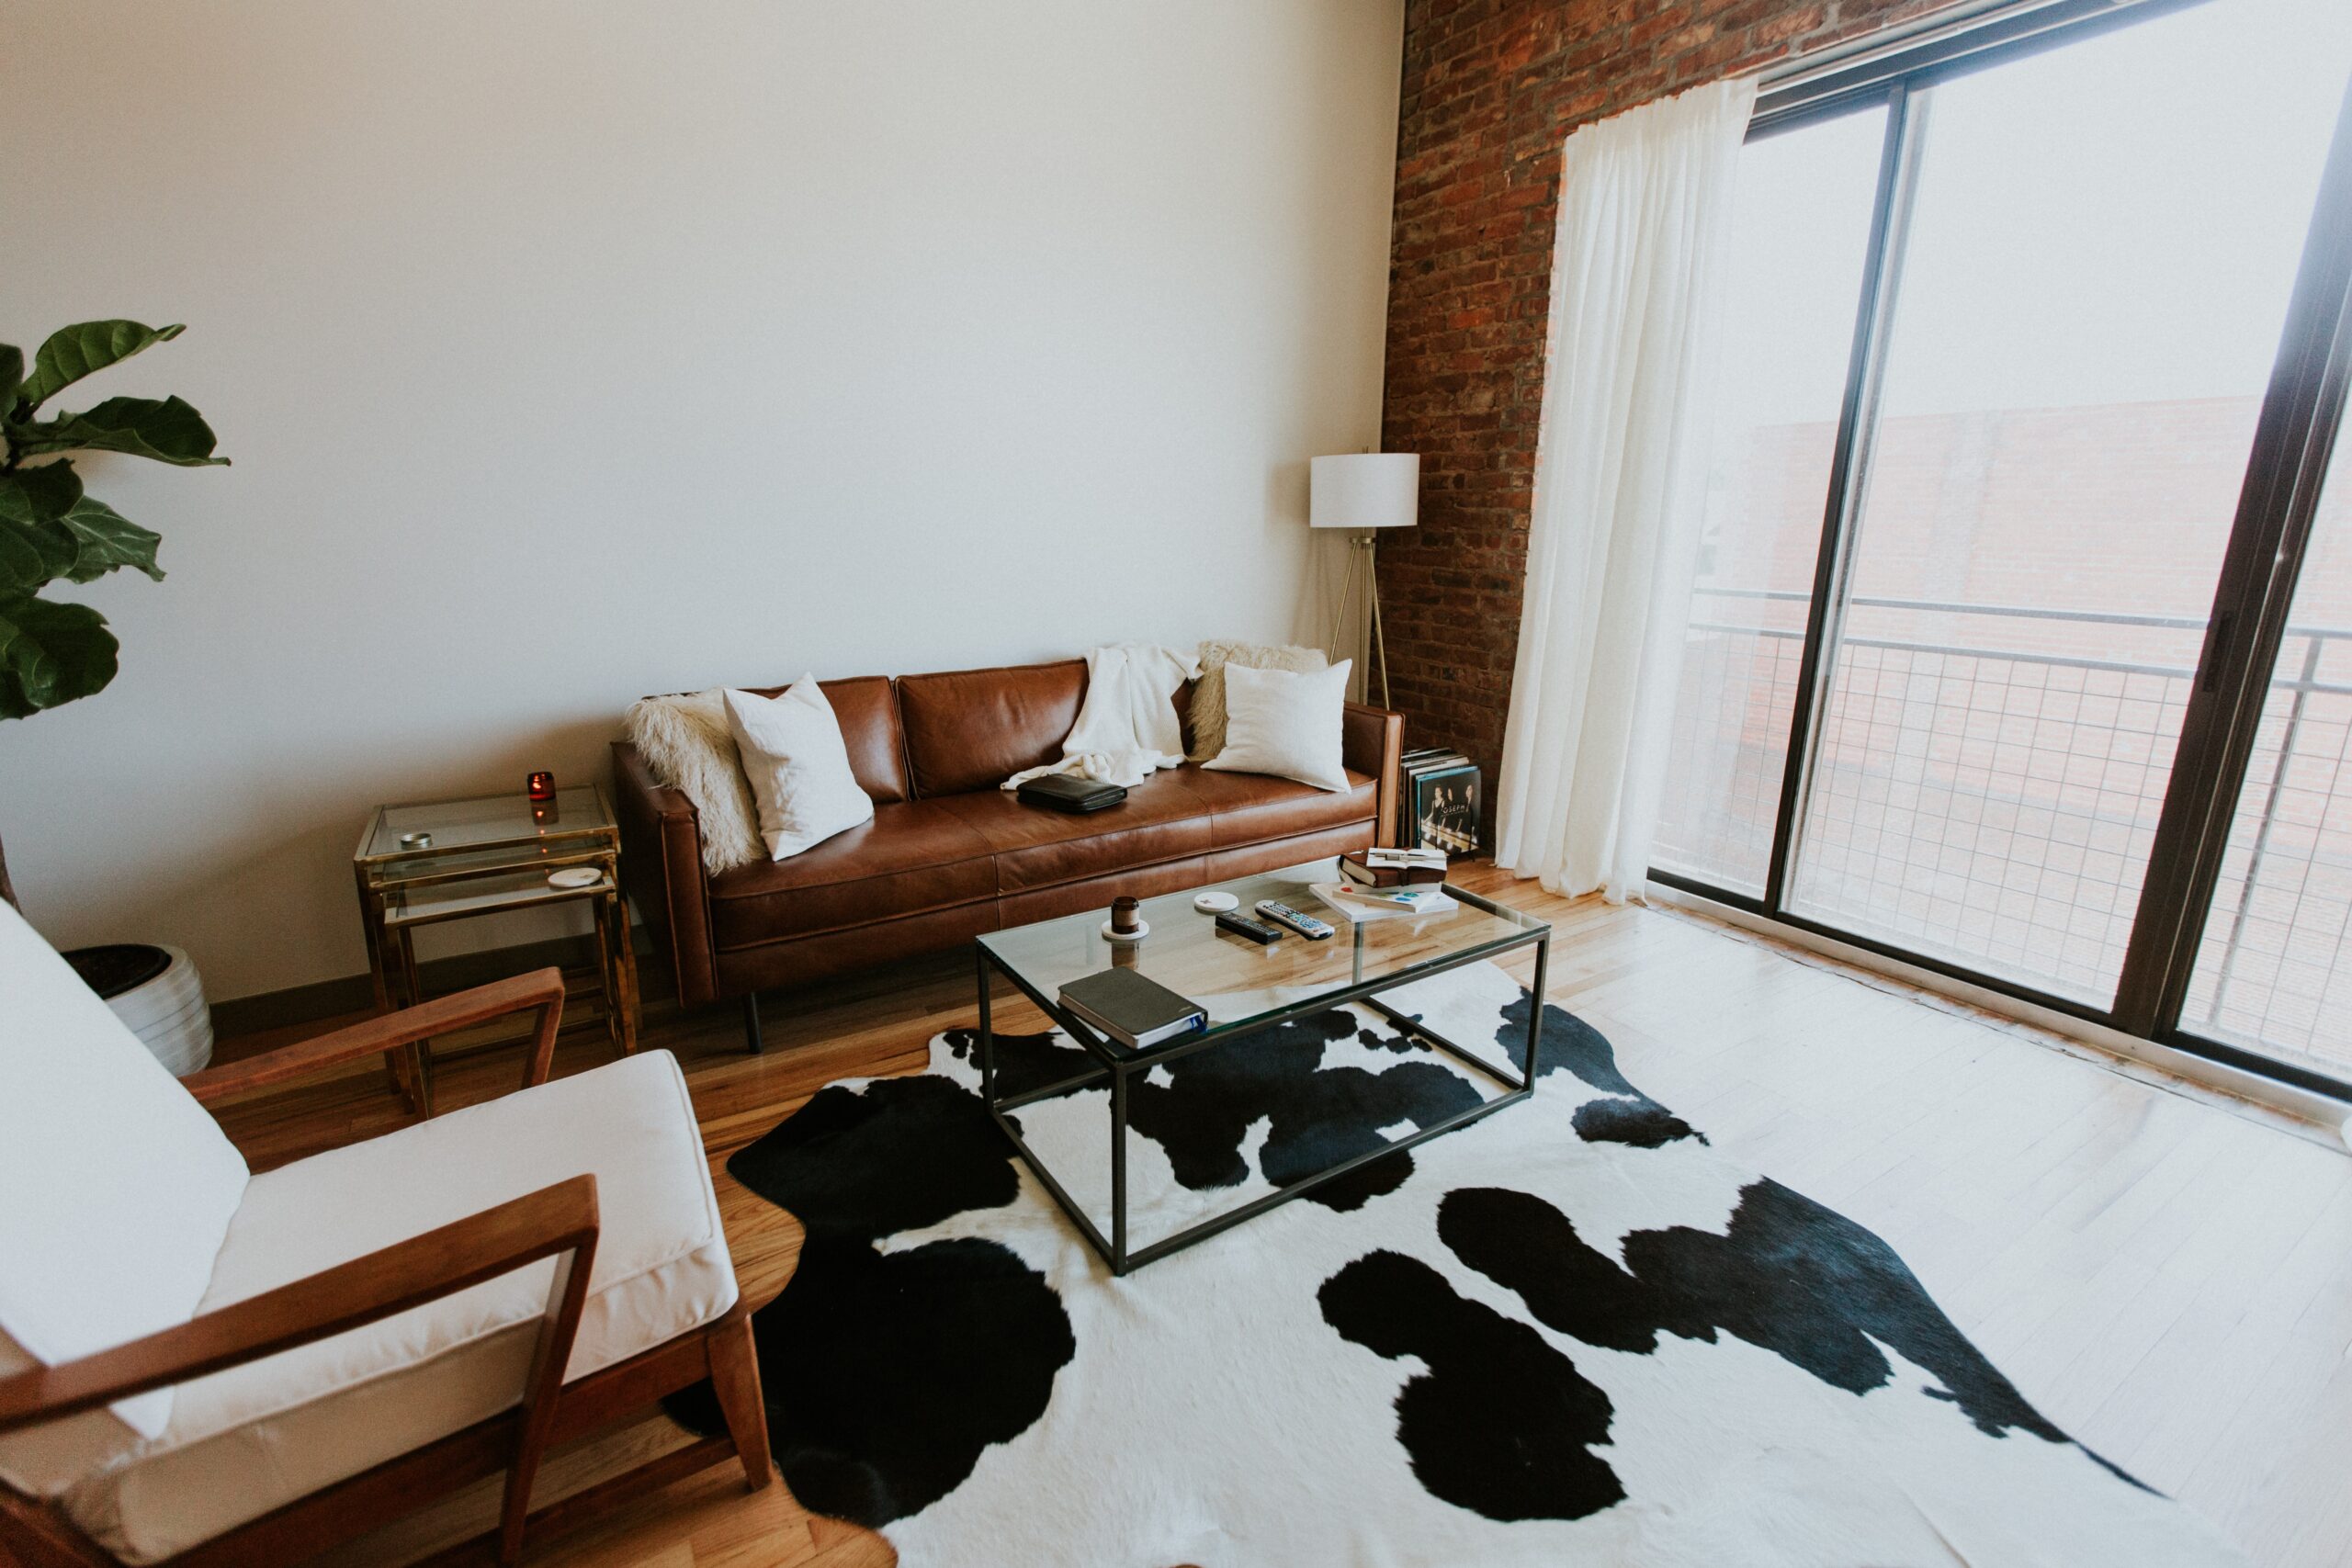 While you can learn how to clean a leather couch with this guide, contact a professional for tough stains that won't come out. Pictured: A living room